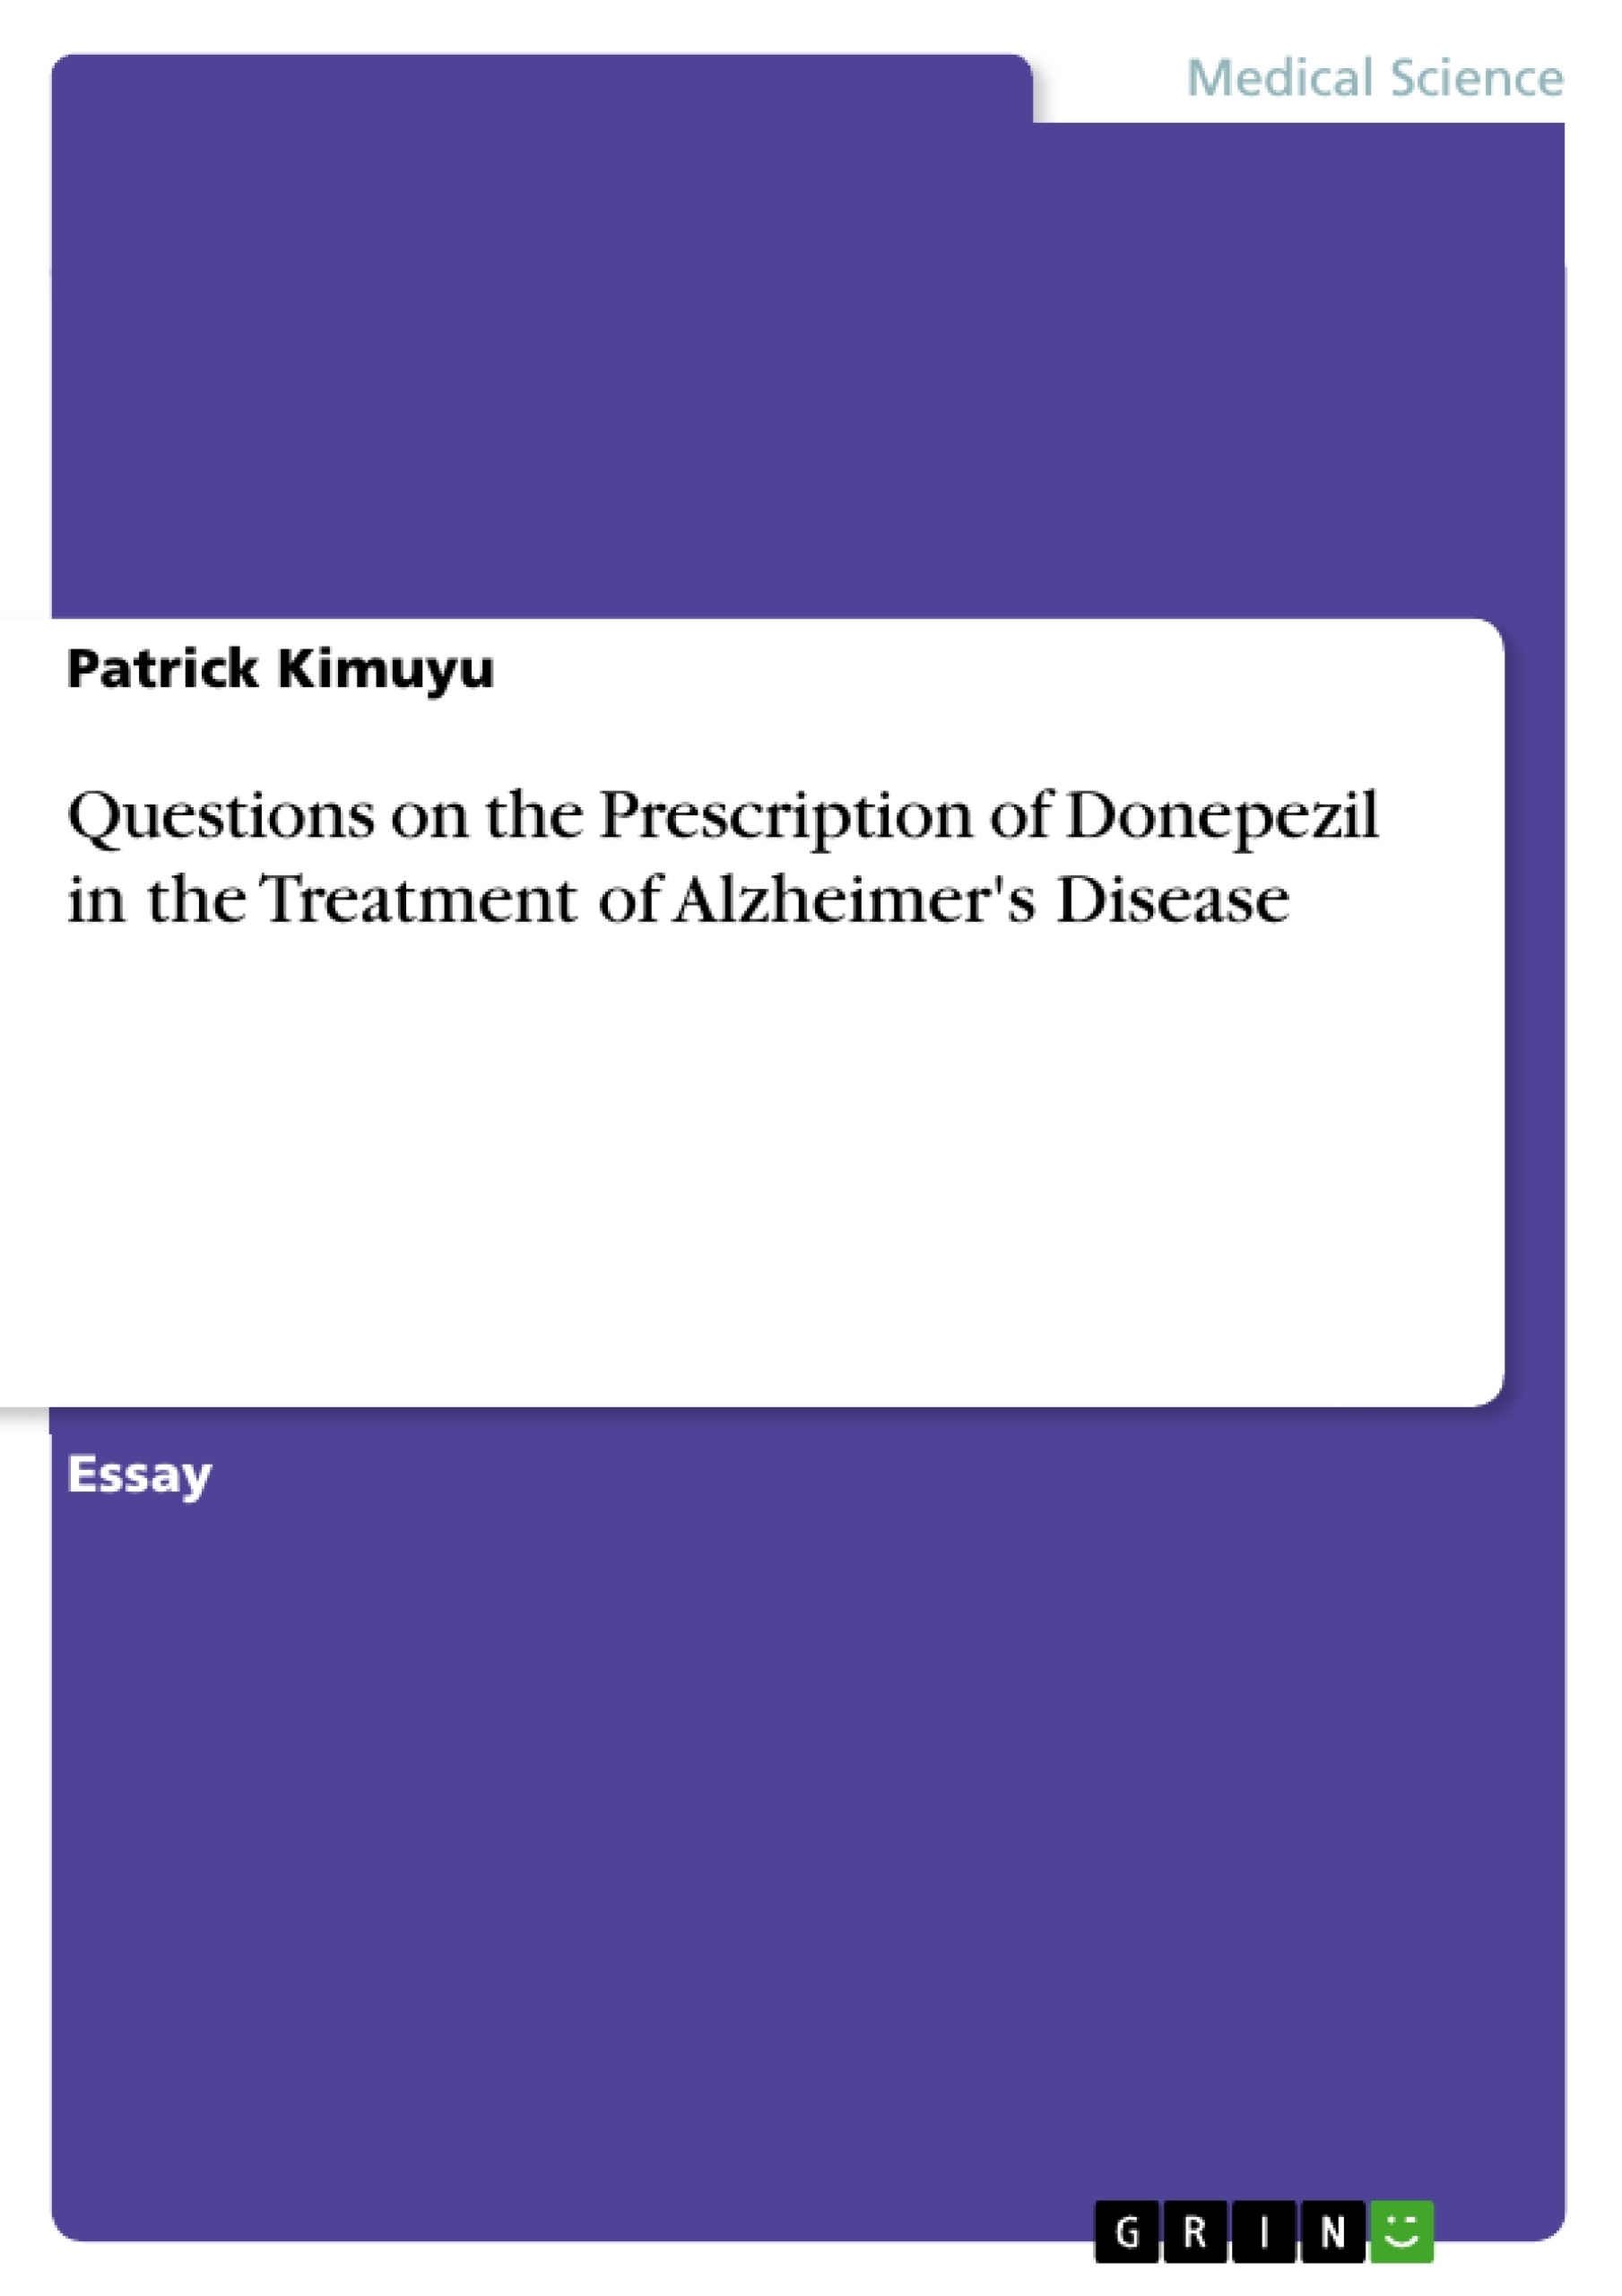 Título: Questions on the Prescription of Donepezil in the Treatment of Alzheimer's Disease